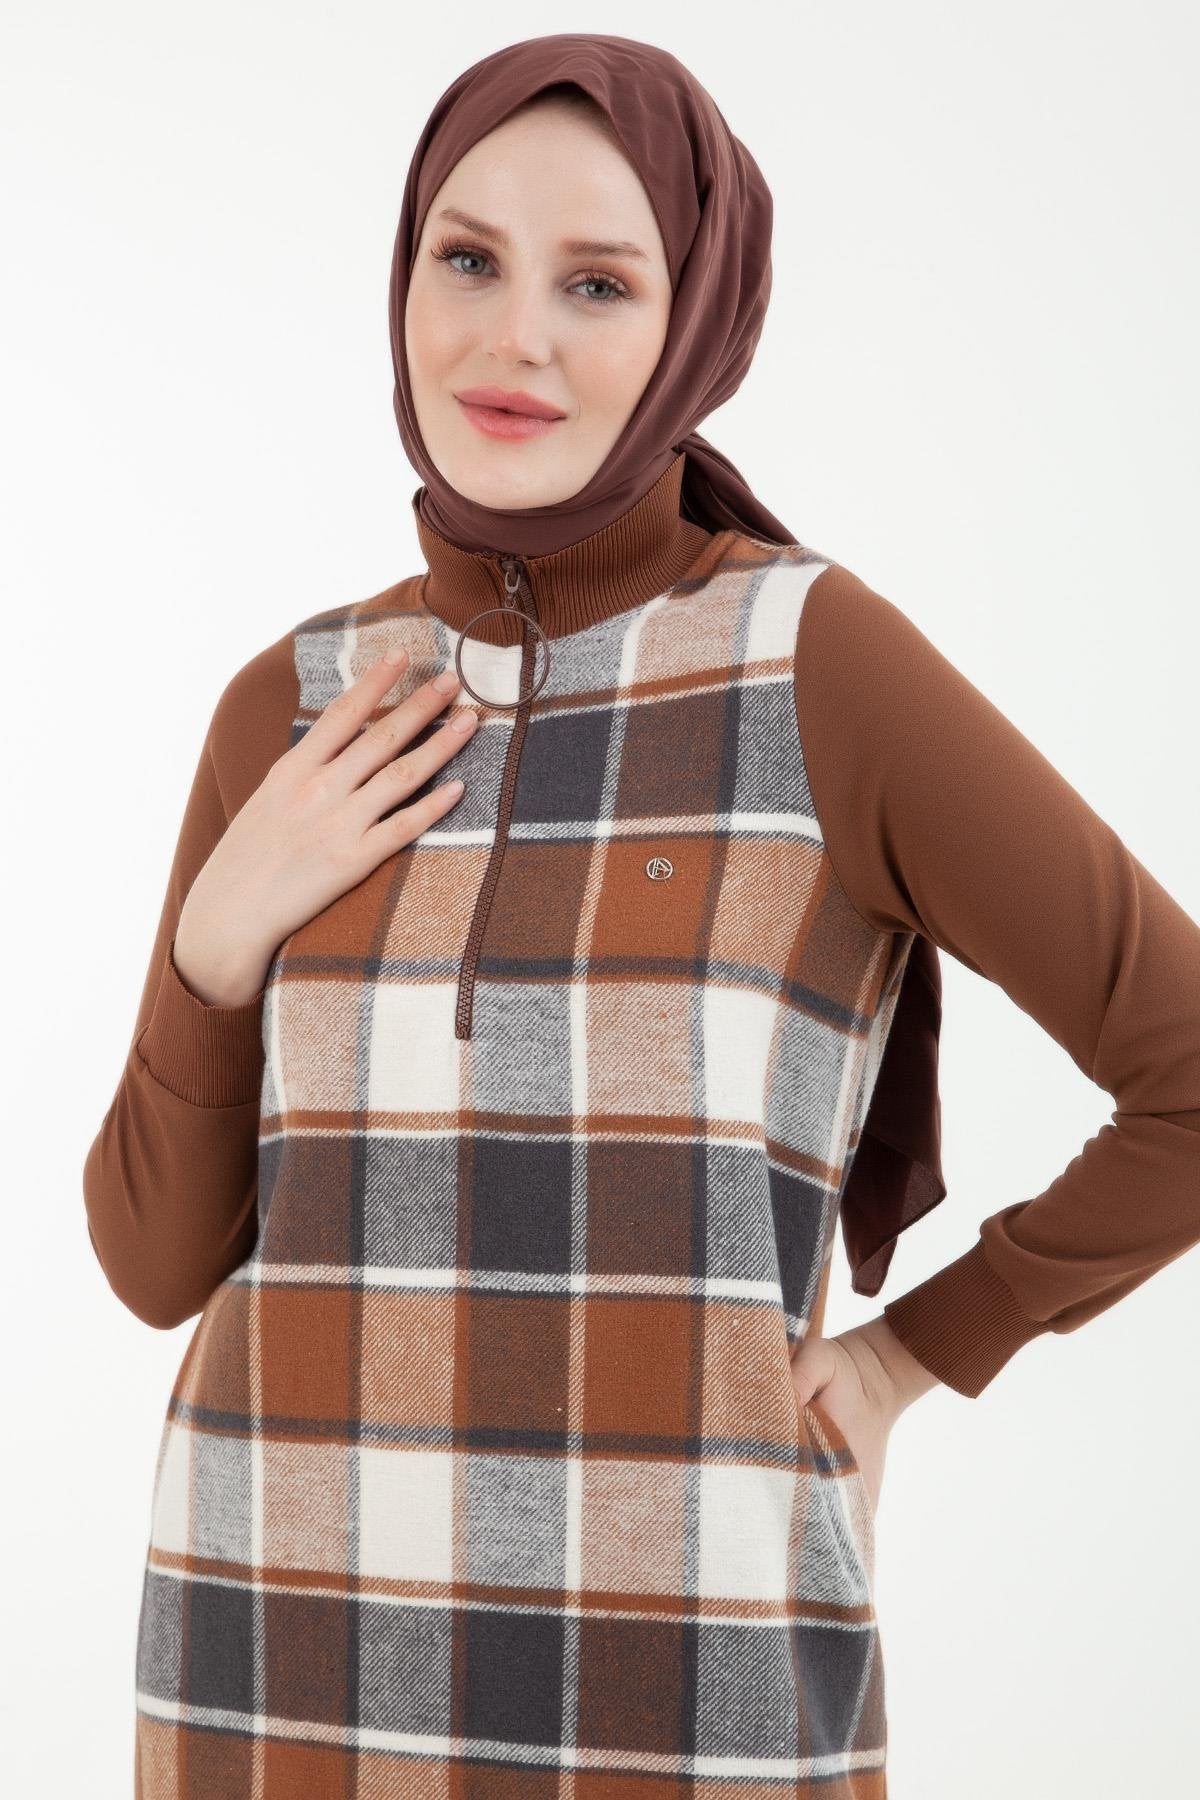 TUNIC - 23KT445  - Brown